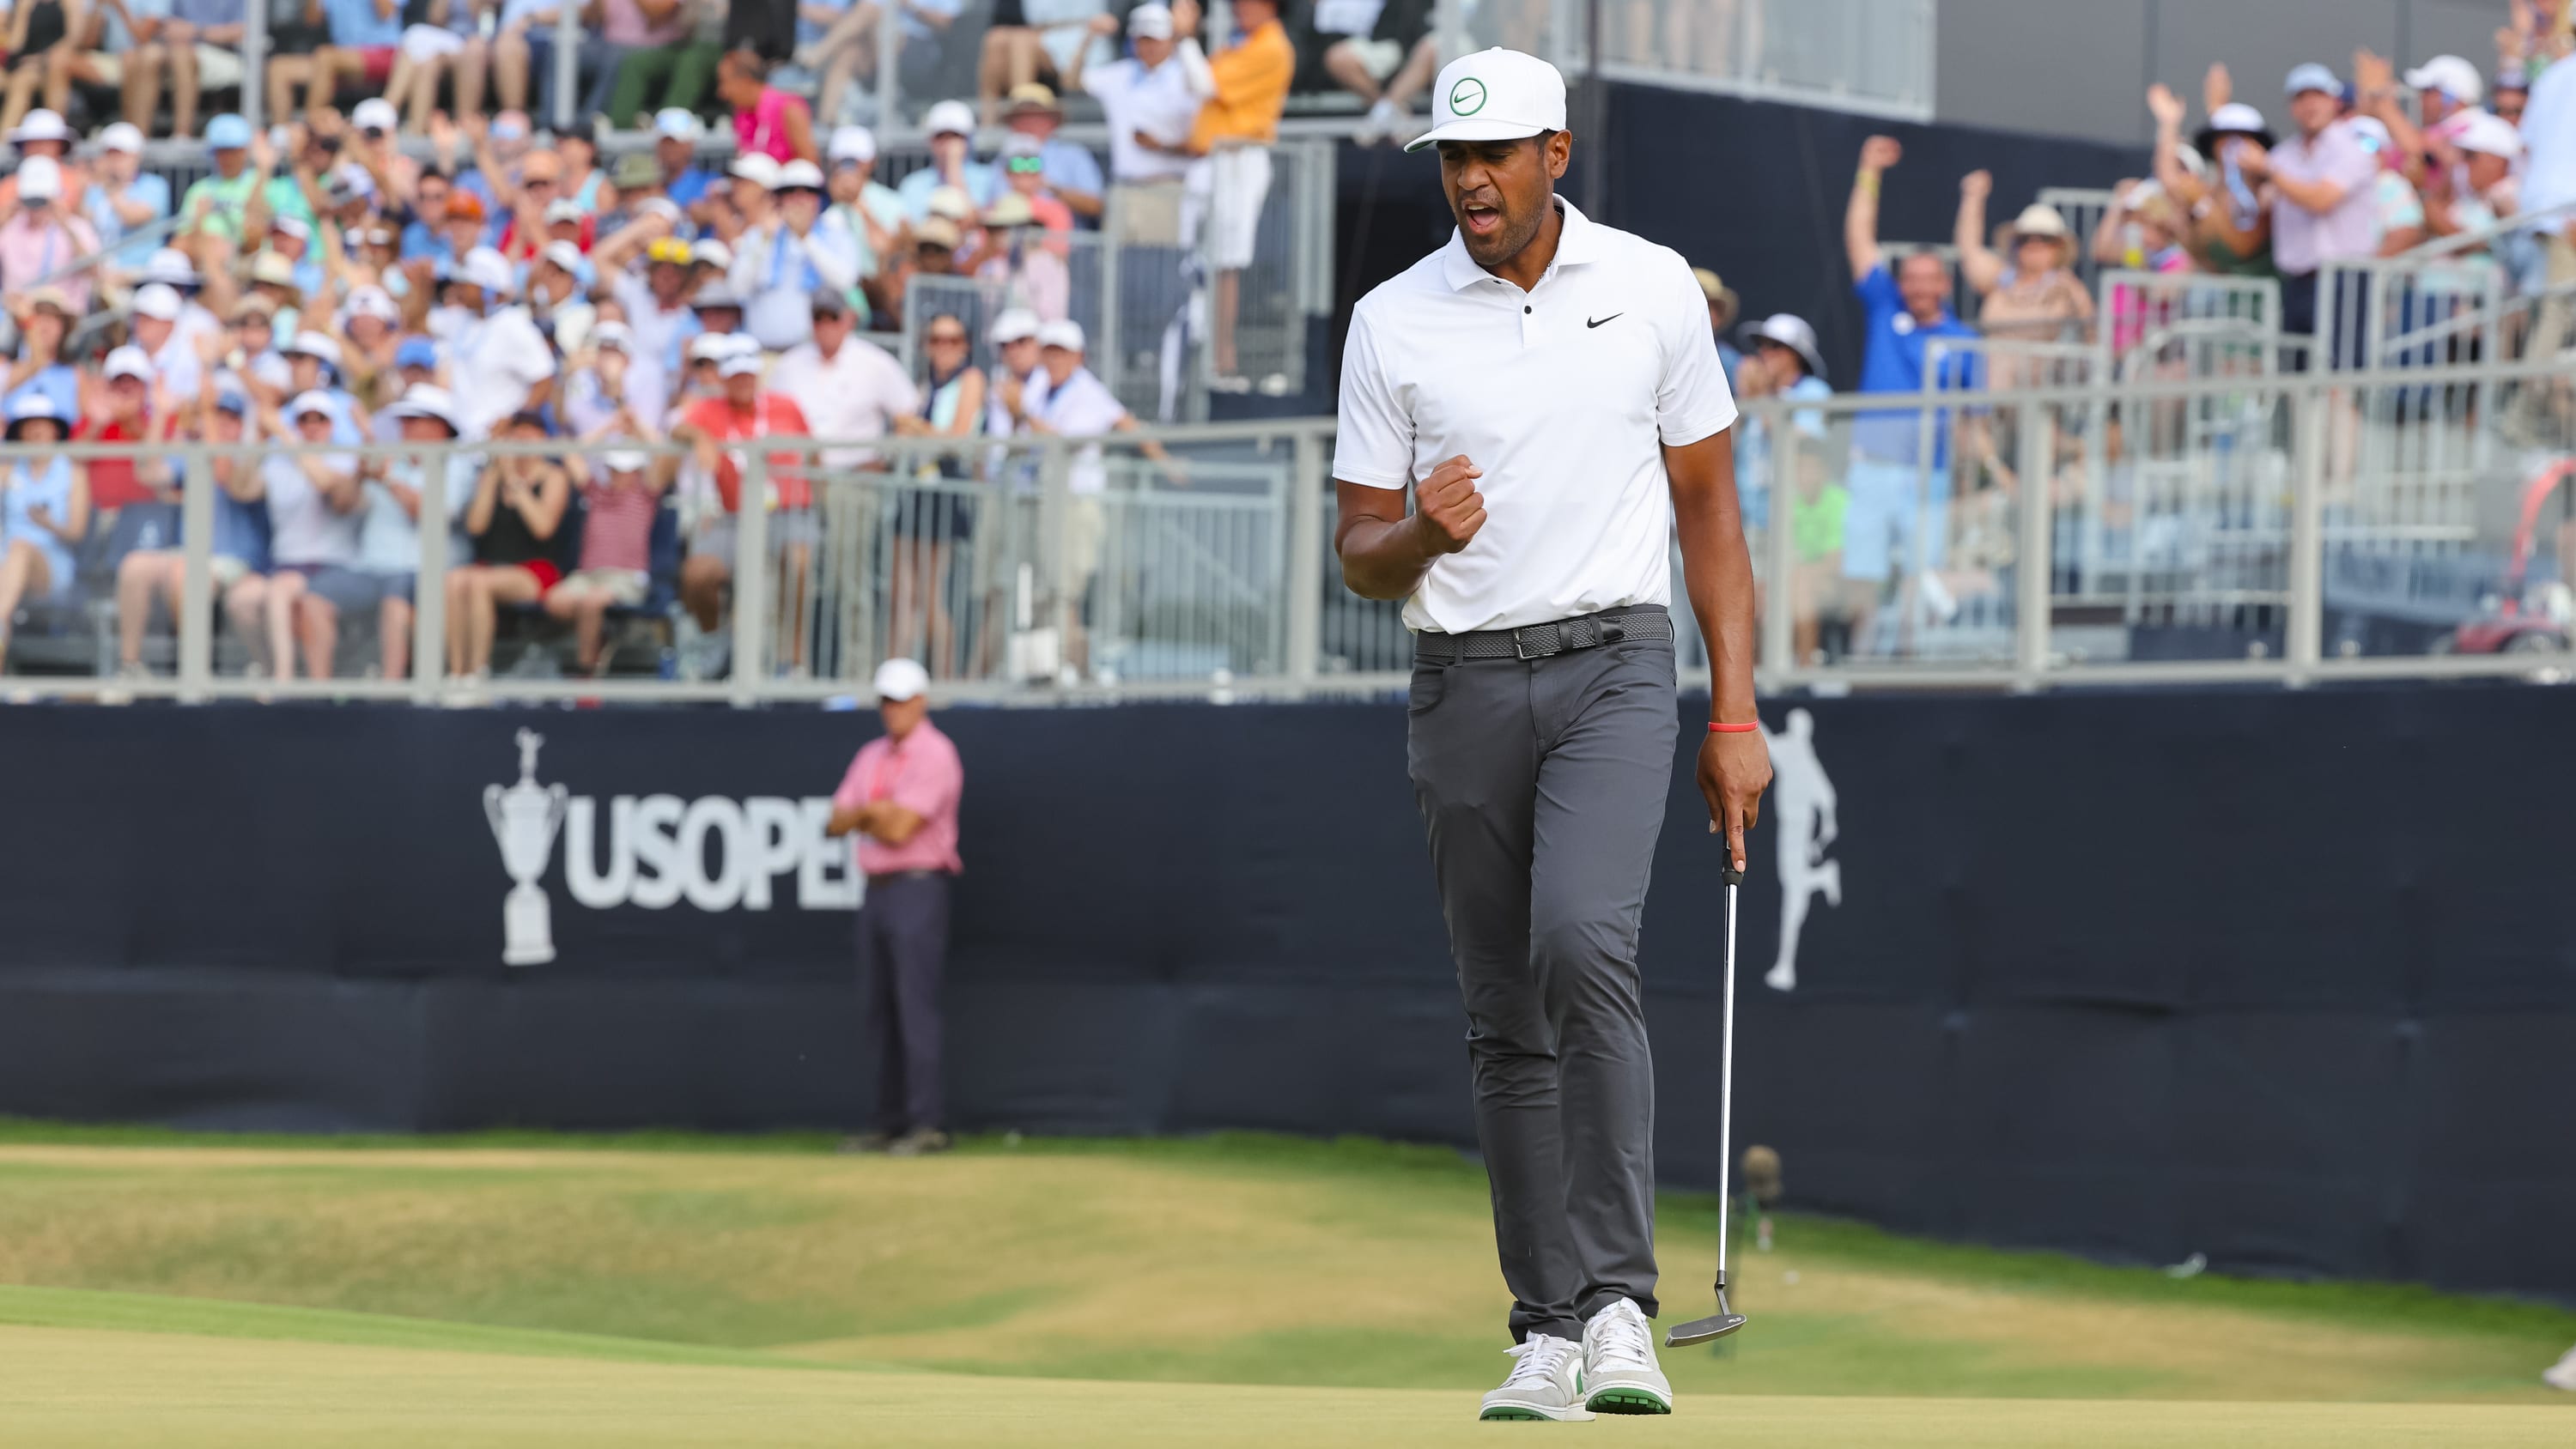 A closing birdie on No. 18 gave Tony Finau a share of third place with Patrick Cantlay, his best-ever finish in a U.S. Open. (USGA/Jeff Haynes)